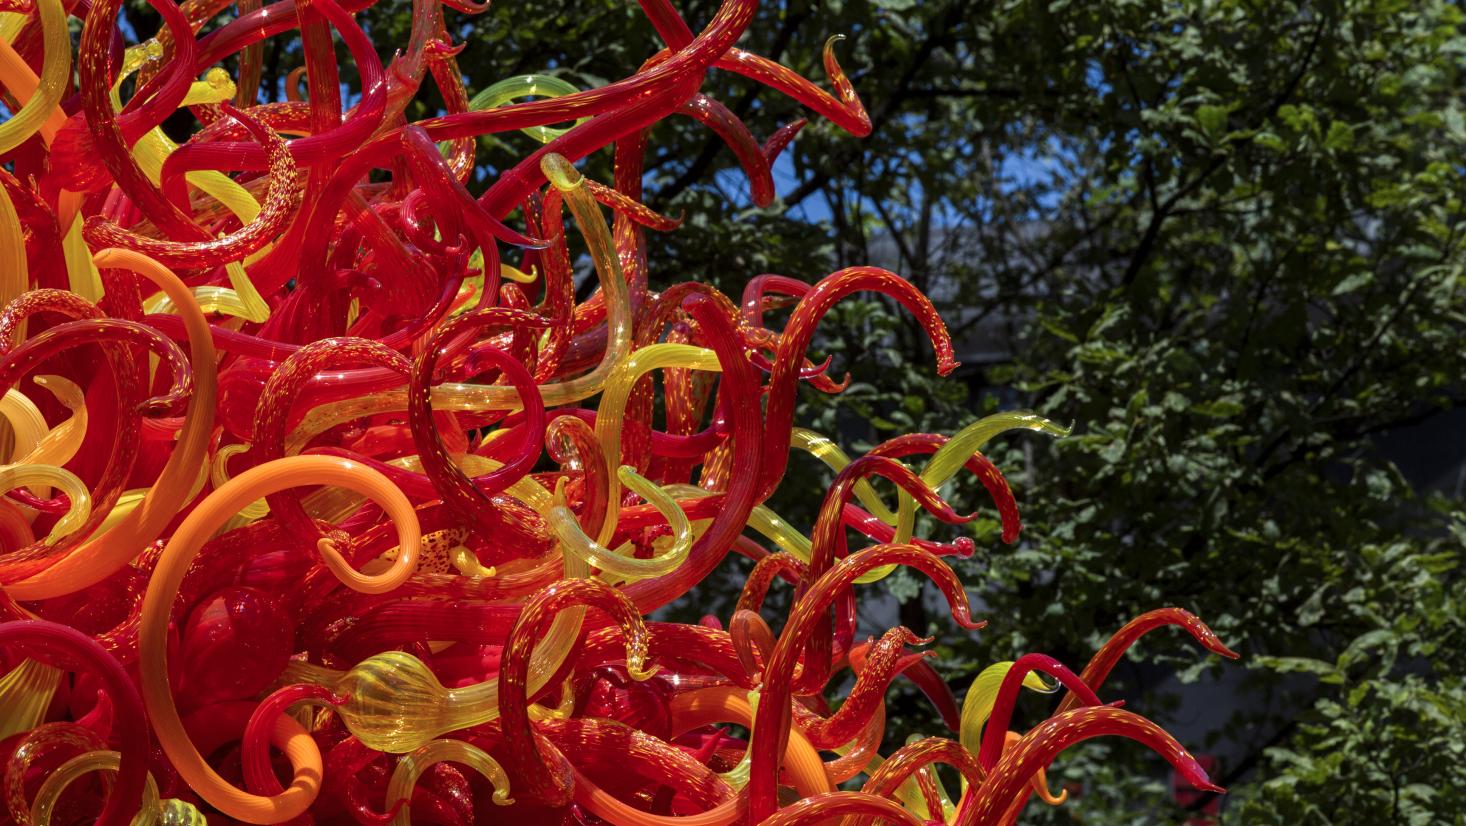 Chihuly Kew Gardens